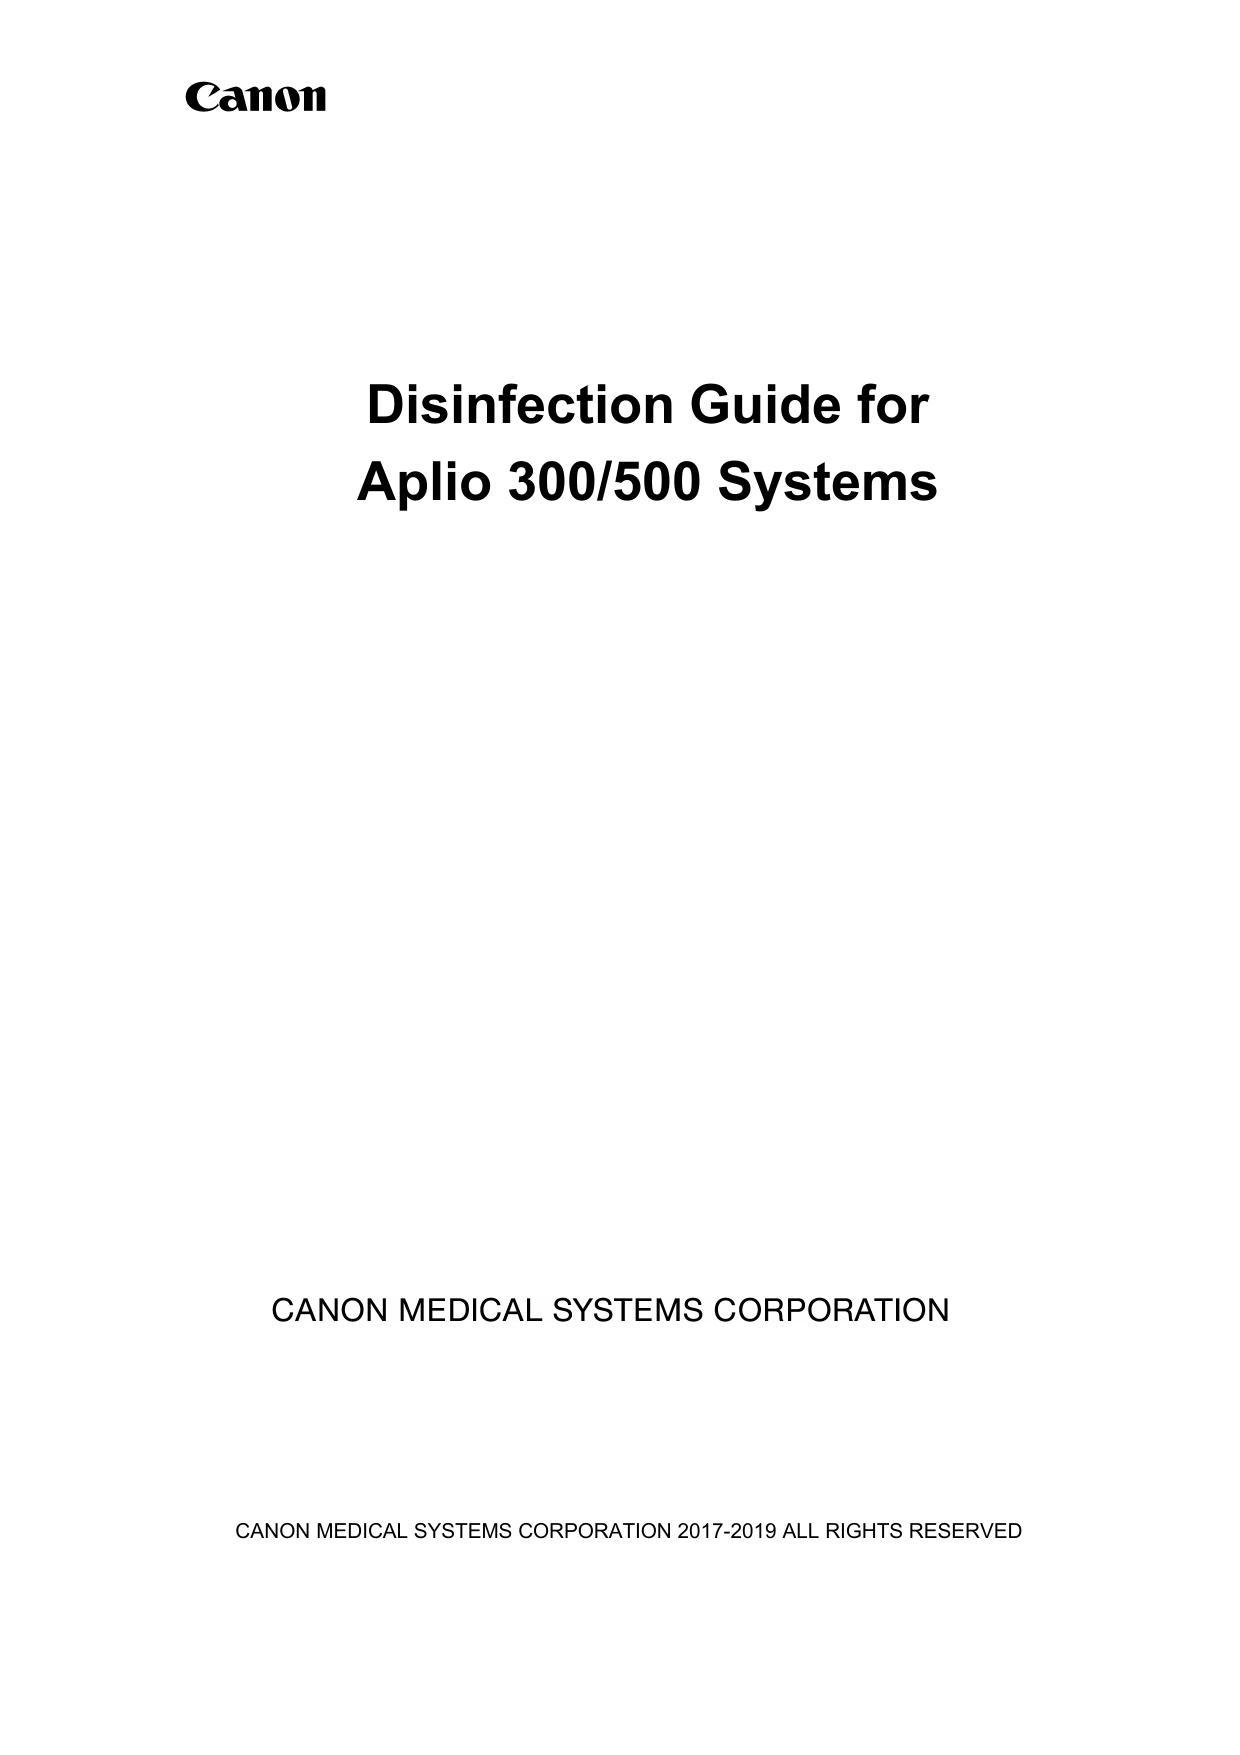 disinfection-guide-for-aplio-300500-systems.pdf